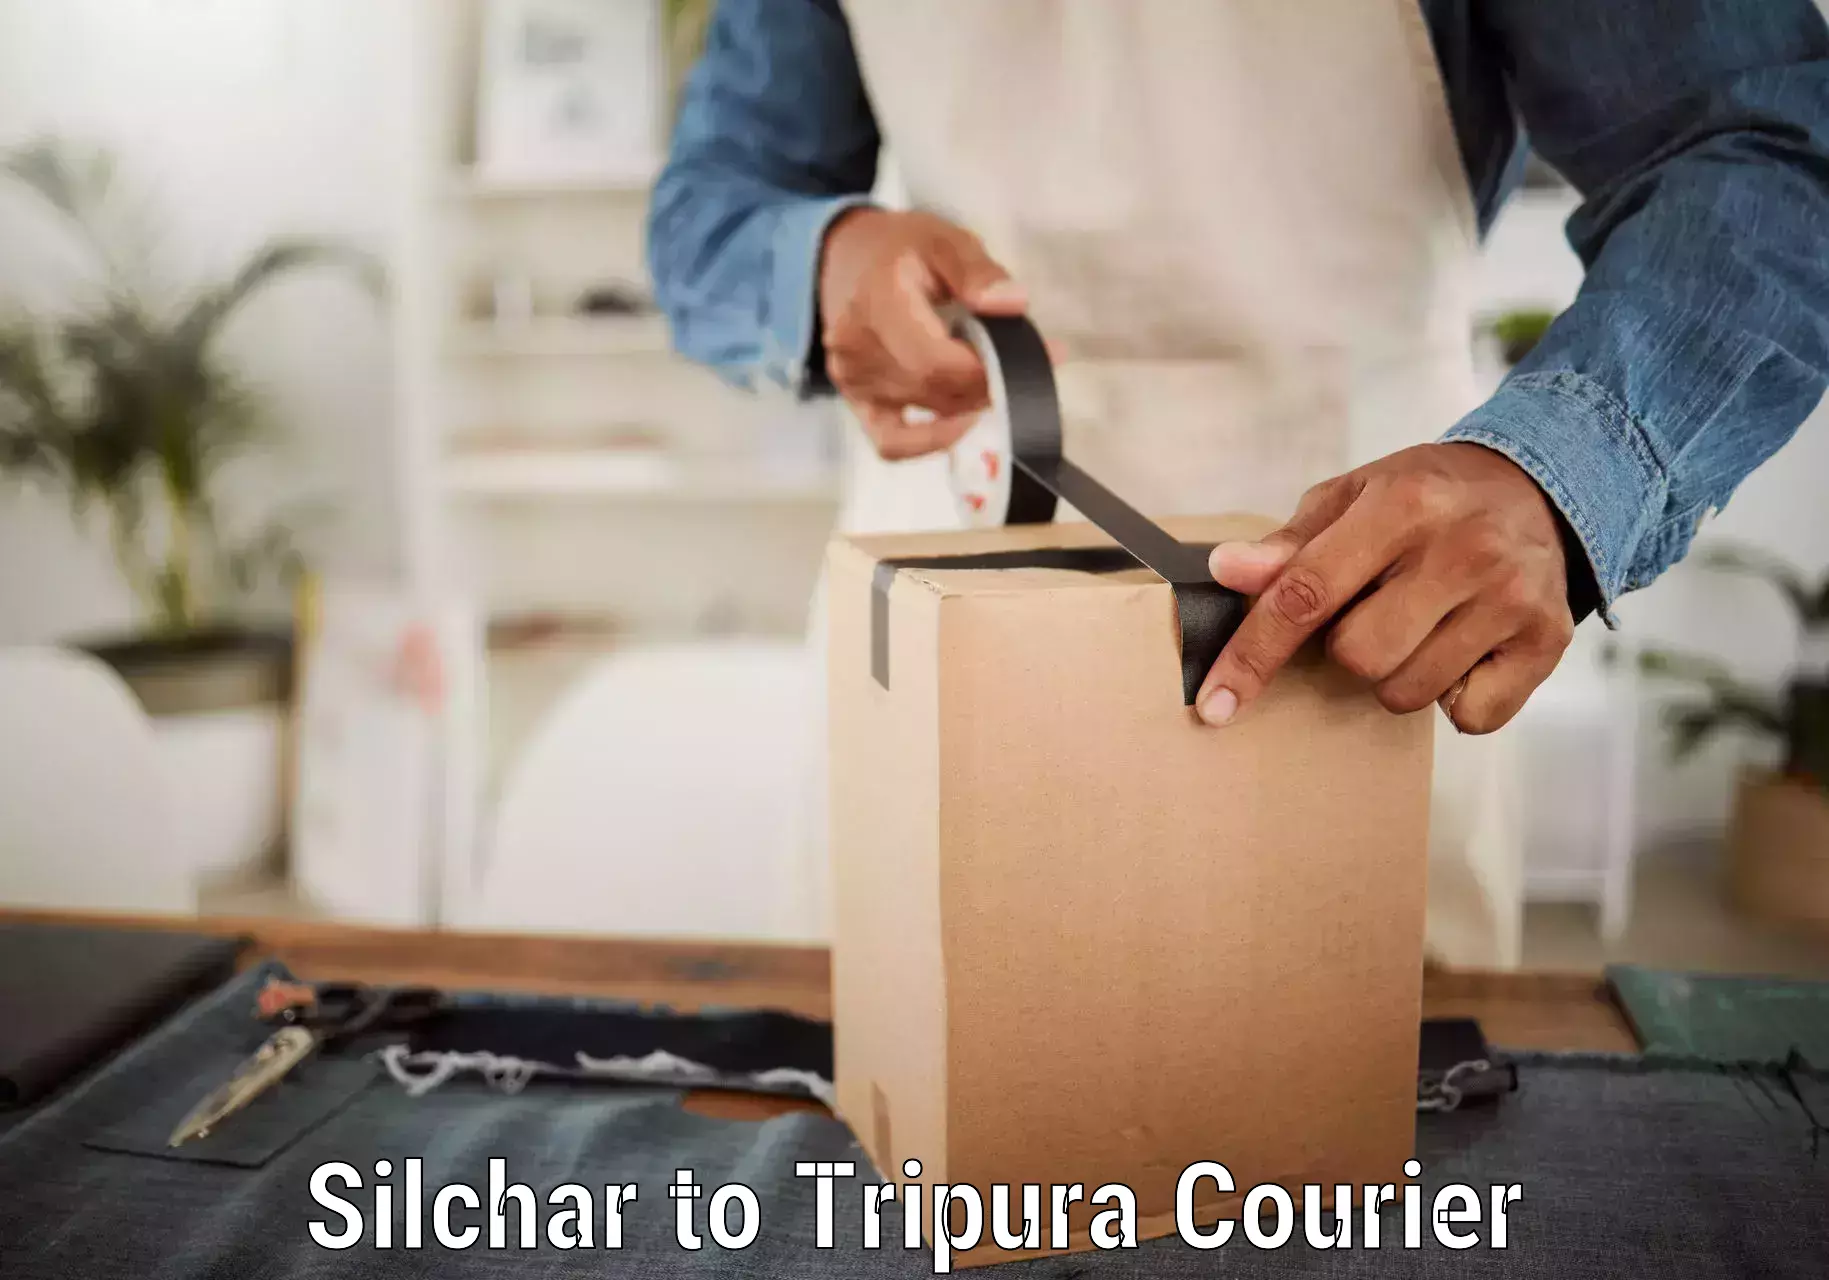 Subscription-based courier Silchar to Tripura